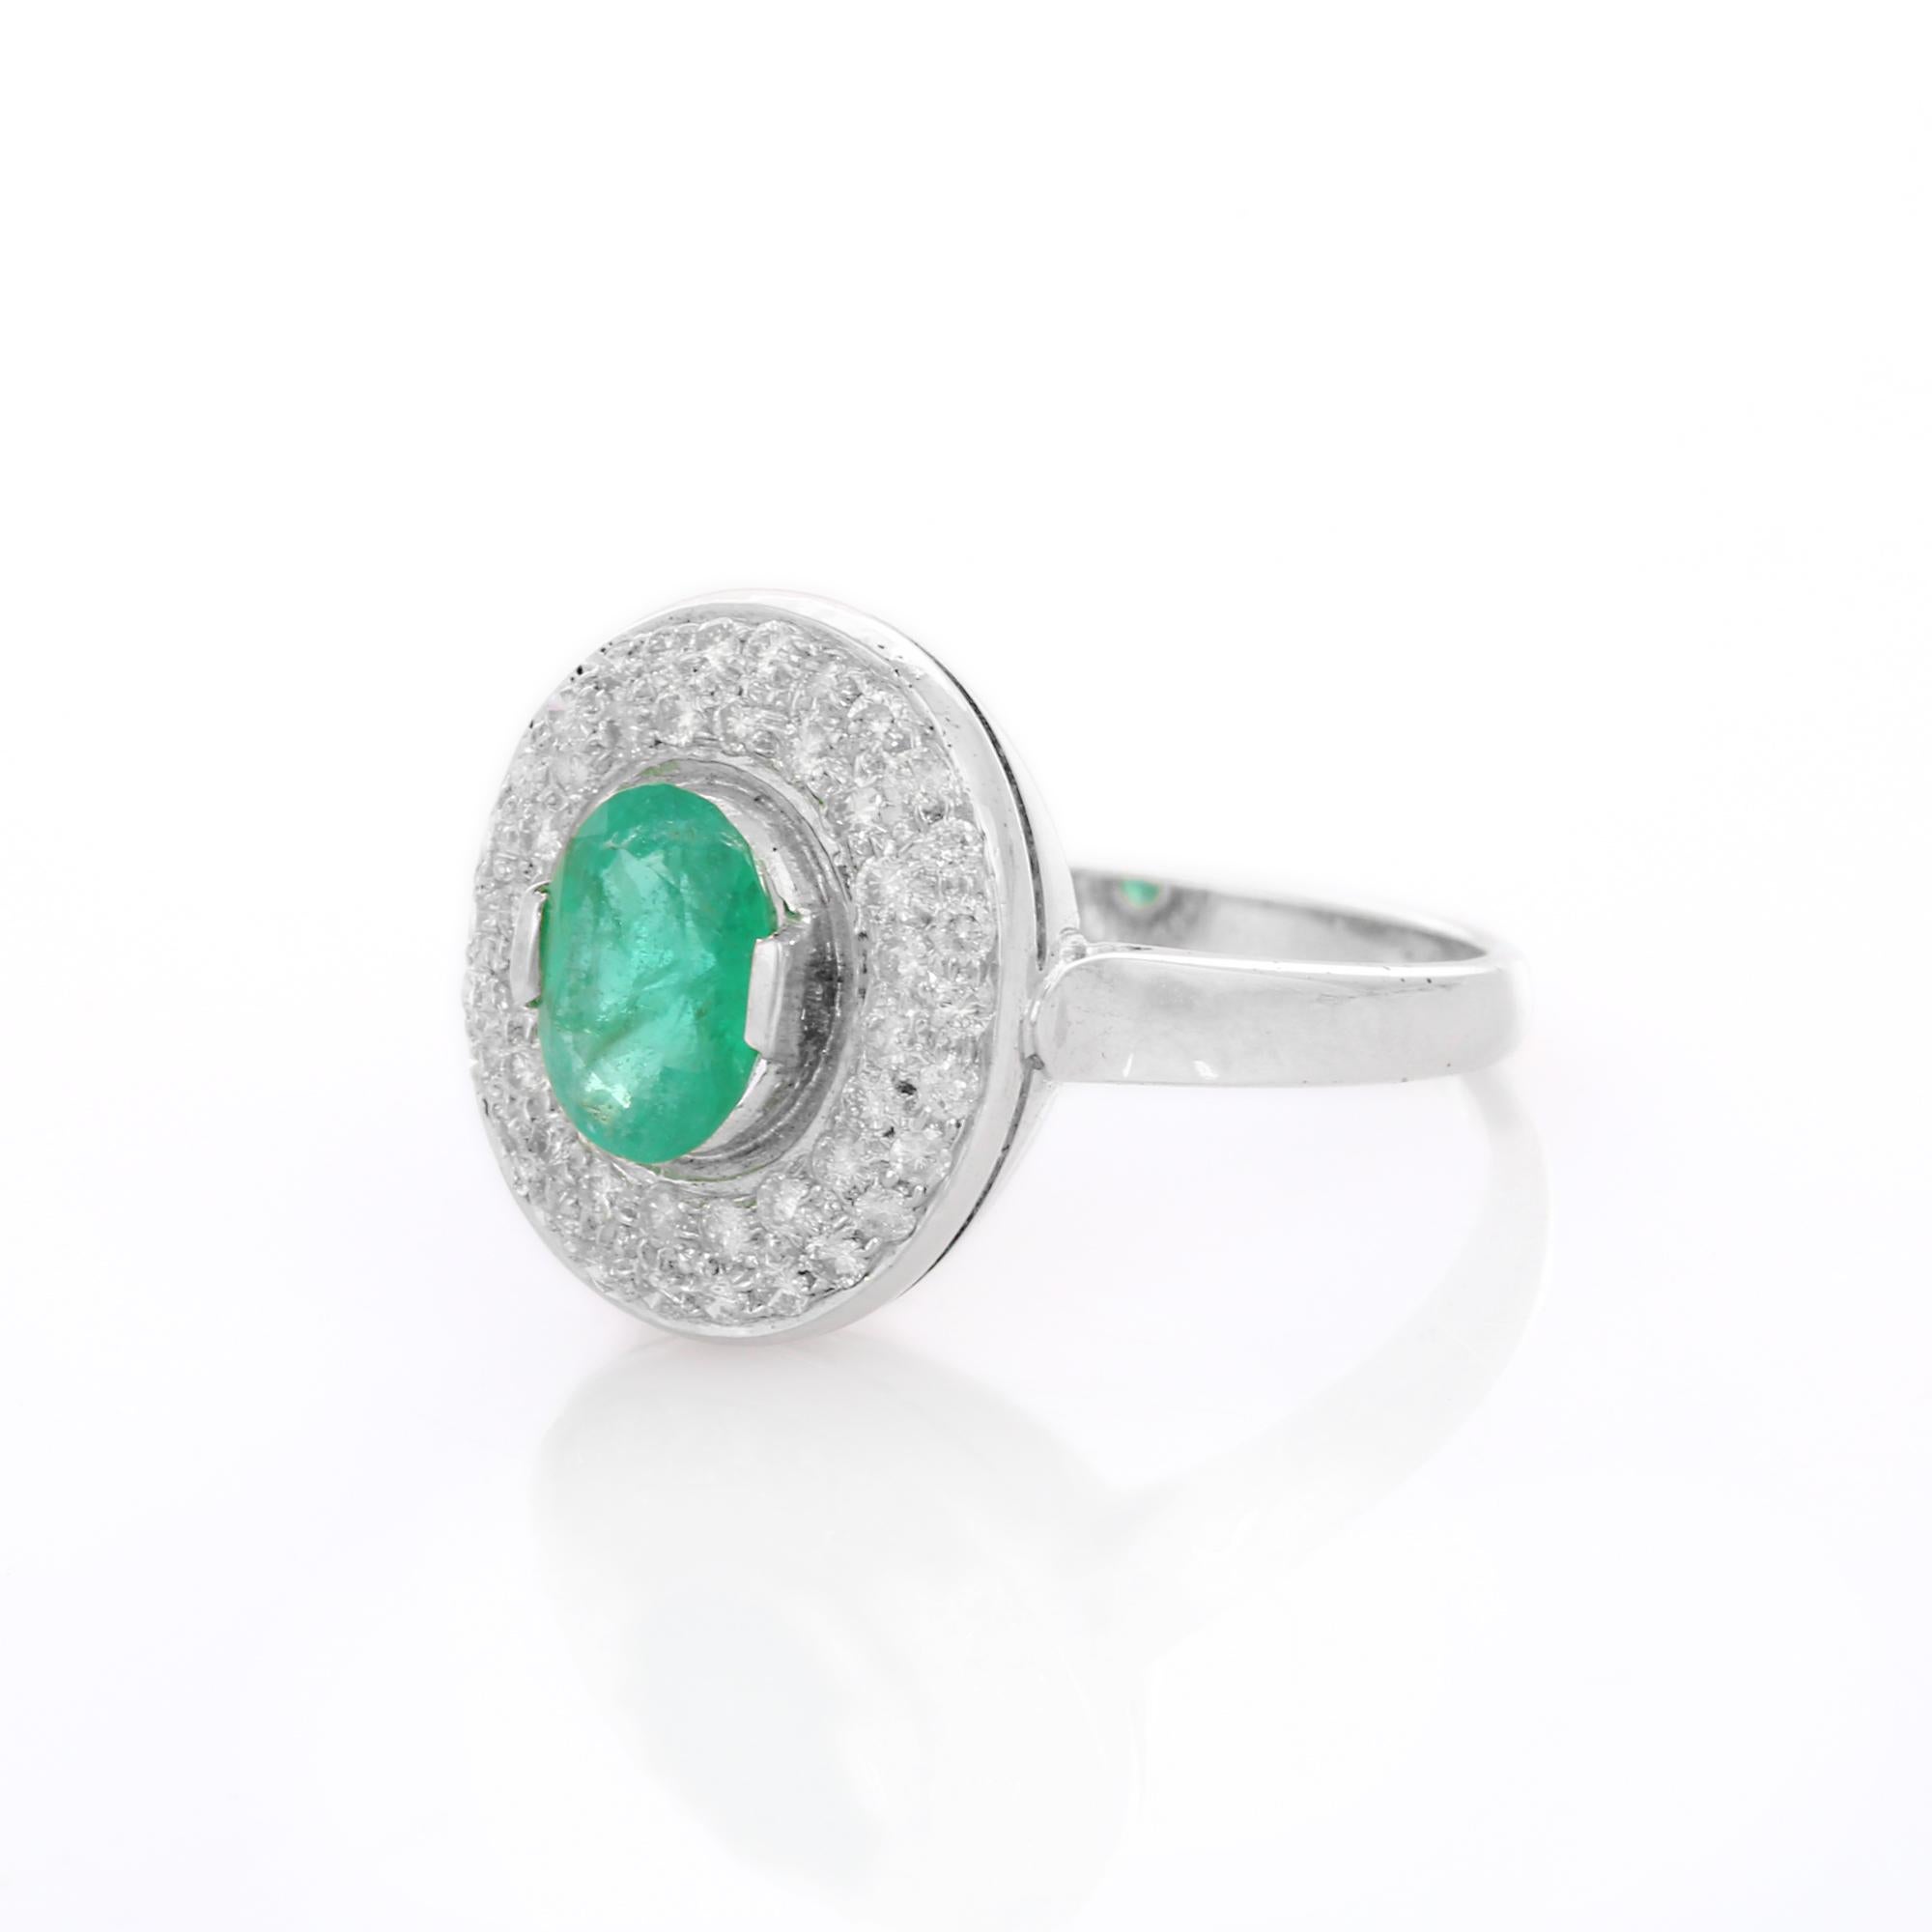 For Sale:  Big Emerald Cocktail Ring with Diamonds in 18K White Gold 4